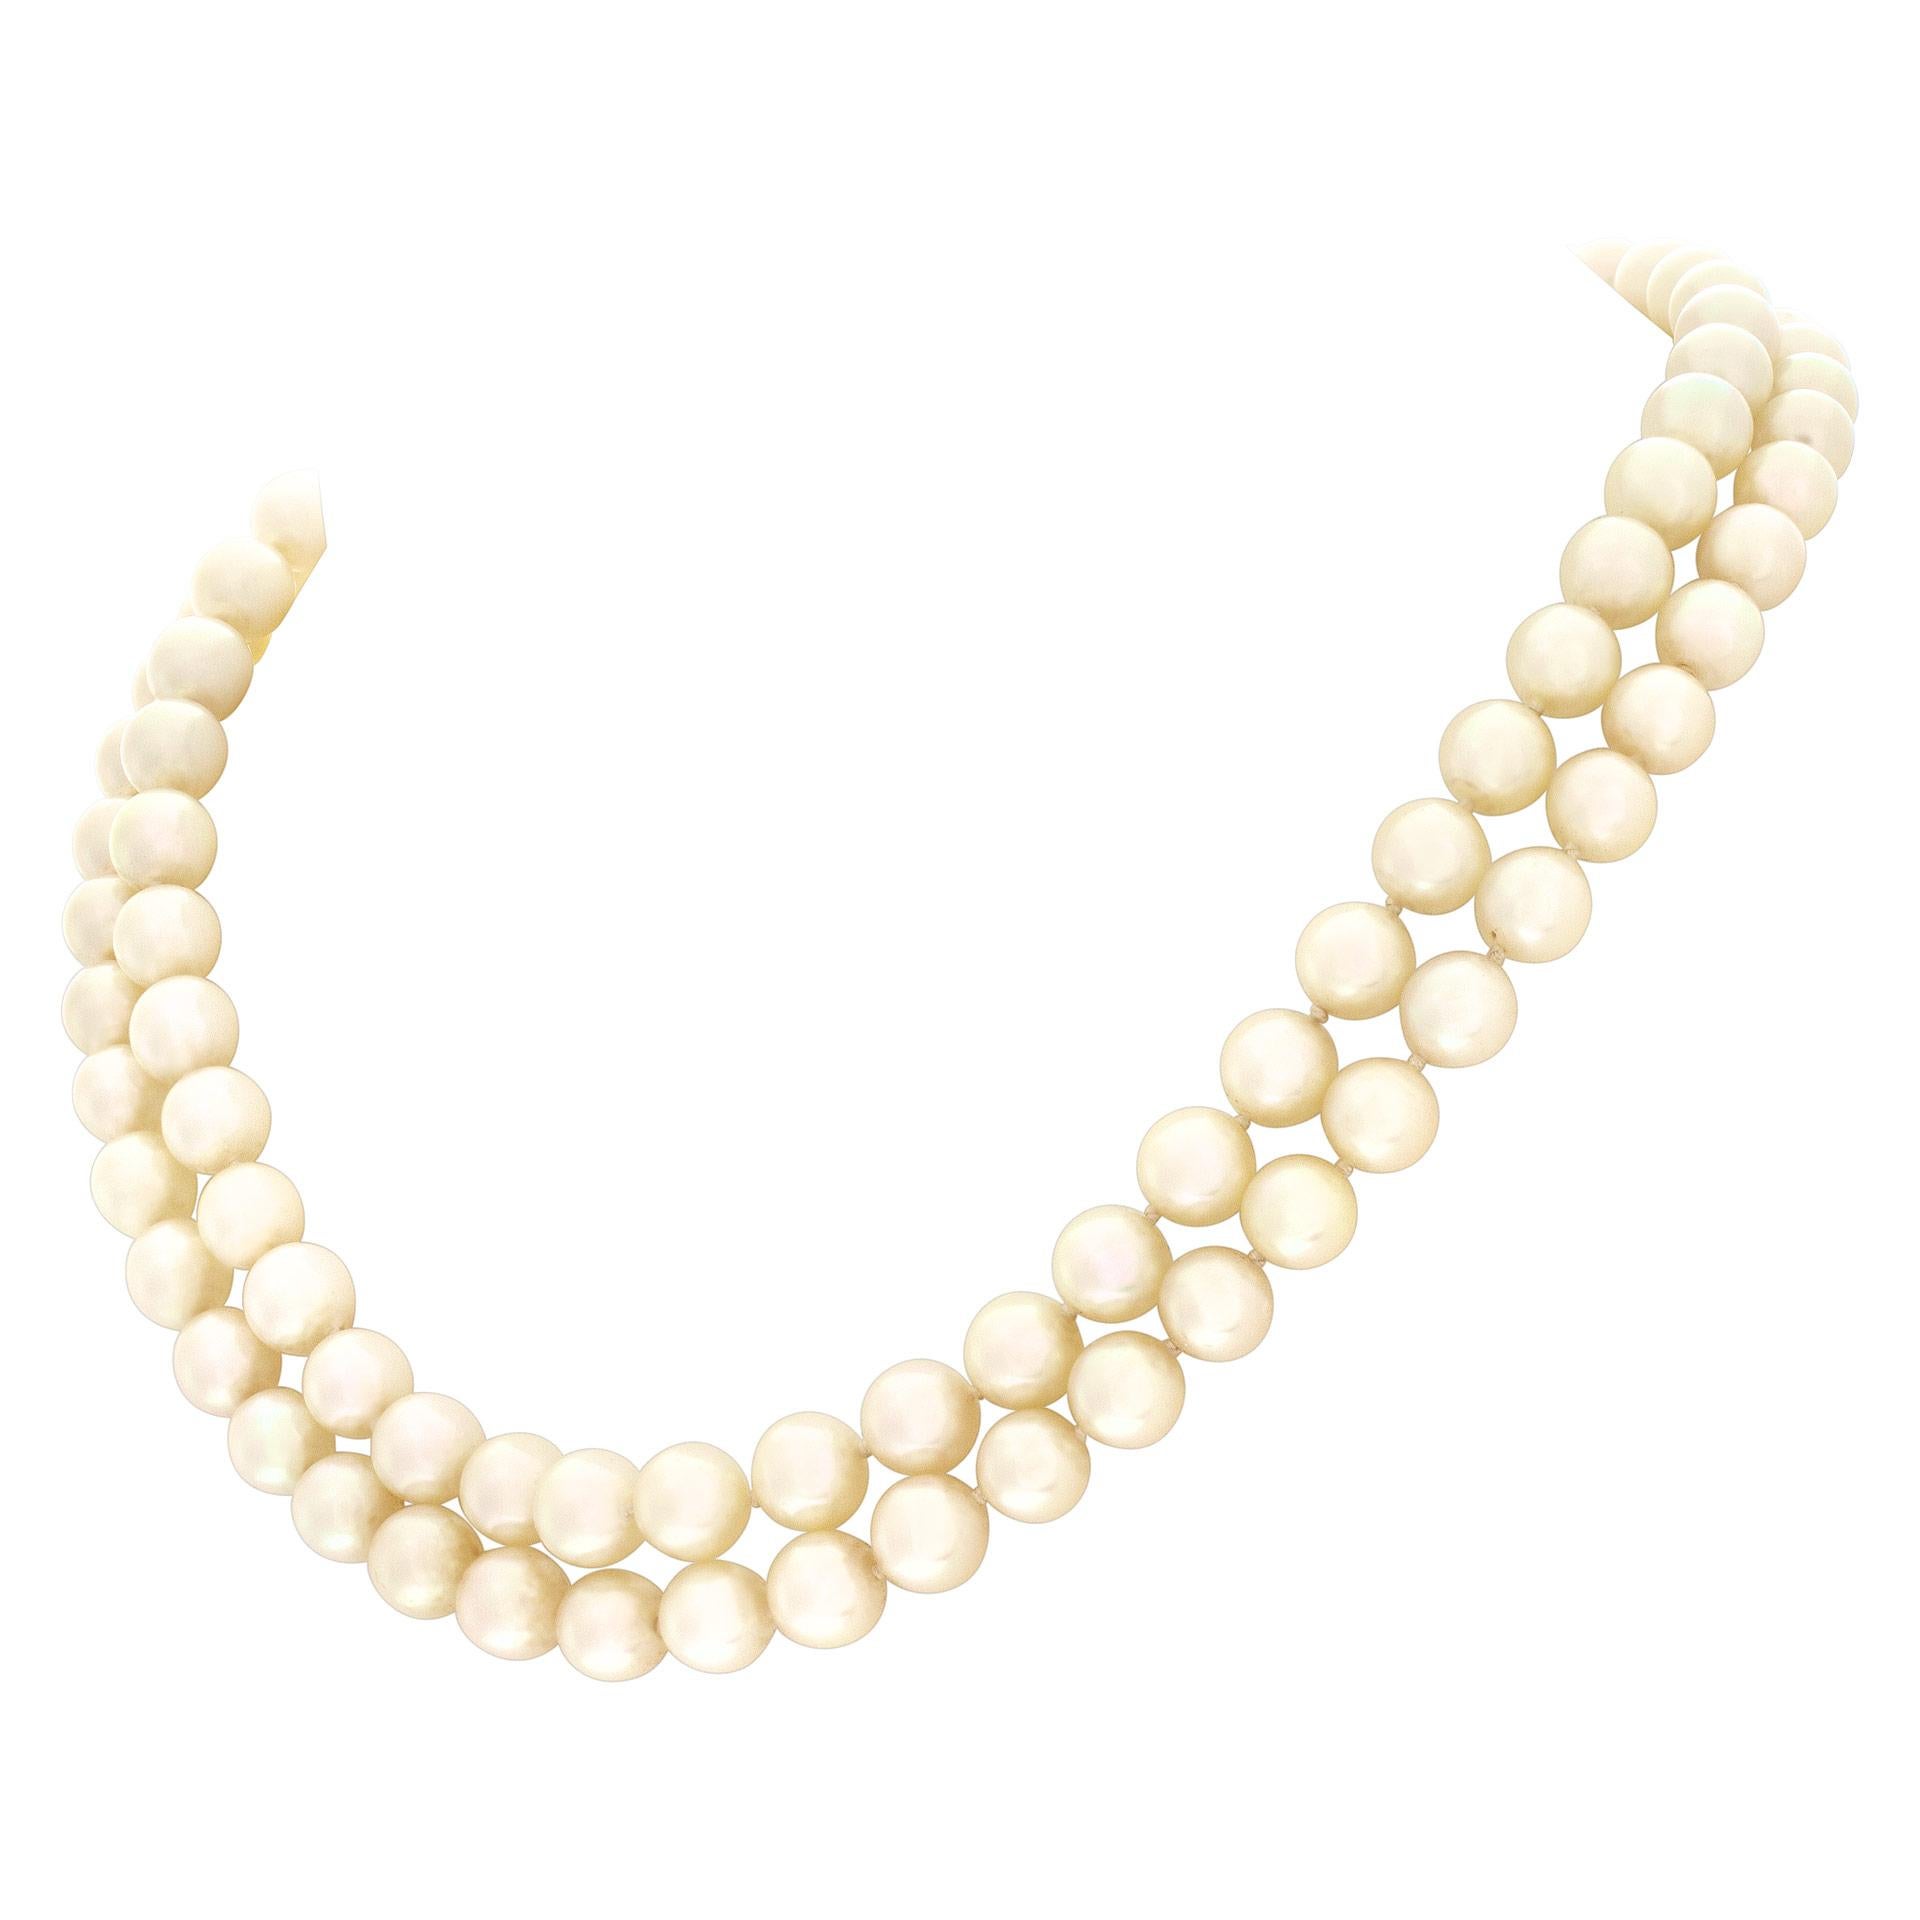 Double row 7 x 7.5mm cultured pearl necklace with 14k white gold diamond, sapphire and pearl clasp. Length 16 inches.